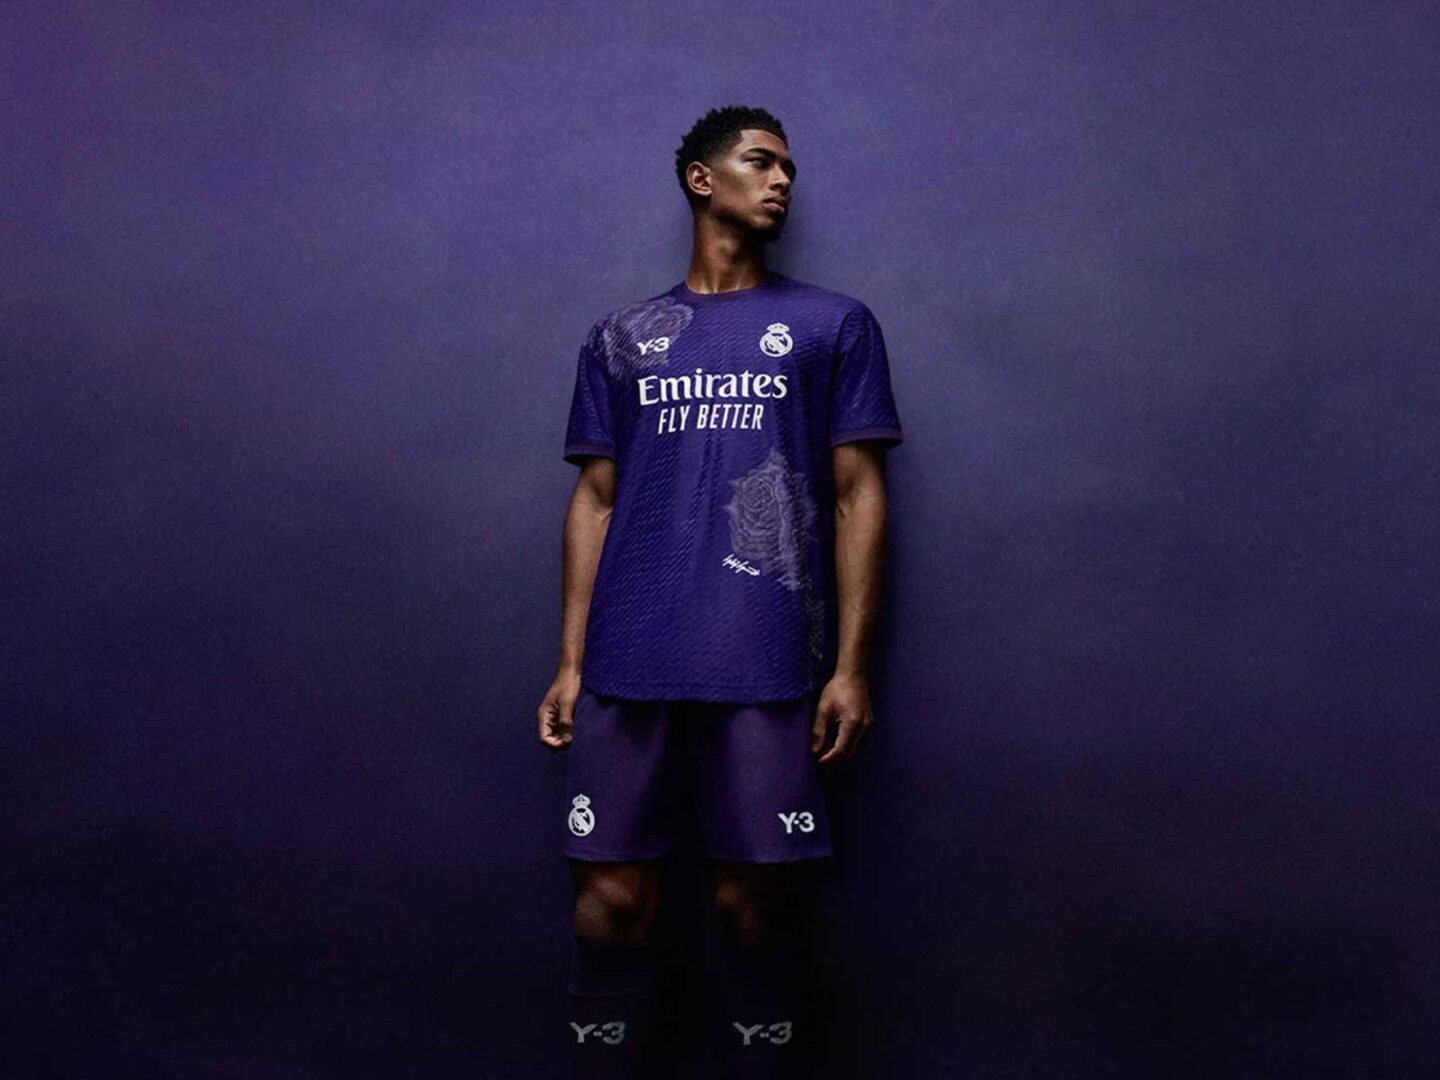 Real Madrid presents its fourth kit with Y-3